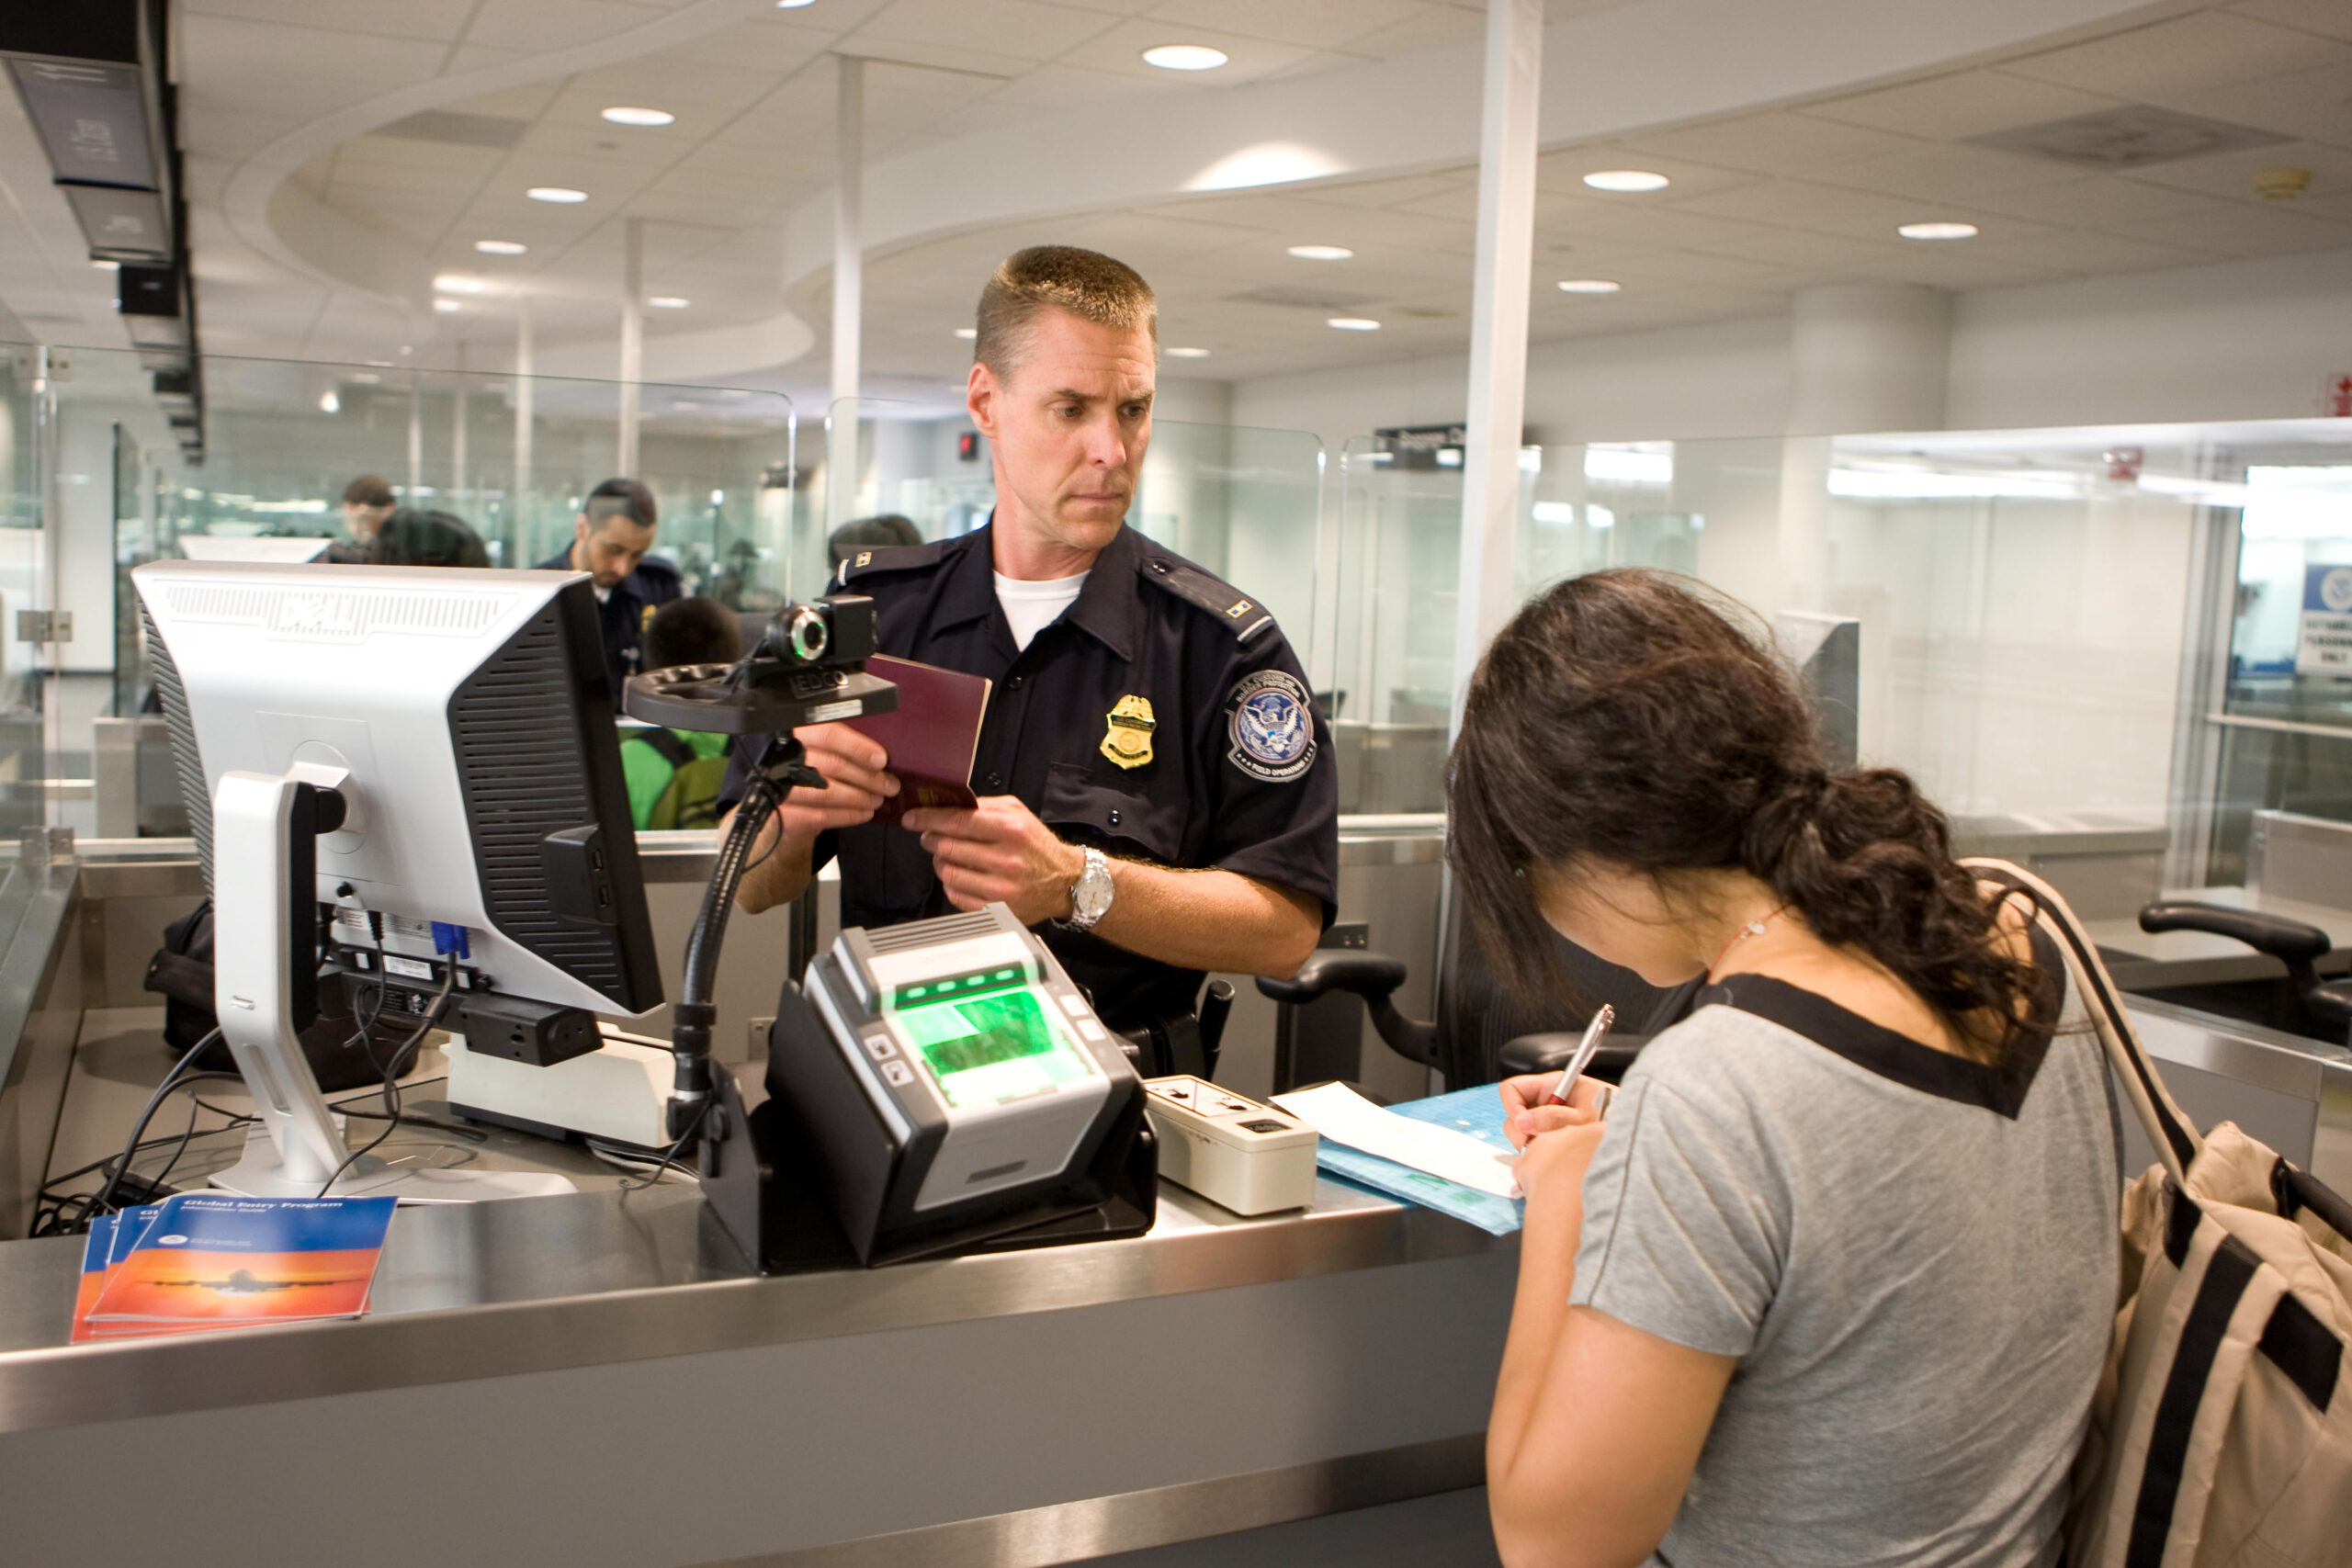 Customs and Immigration Services